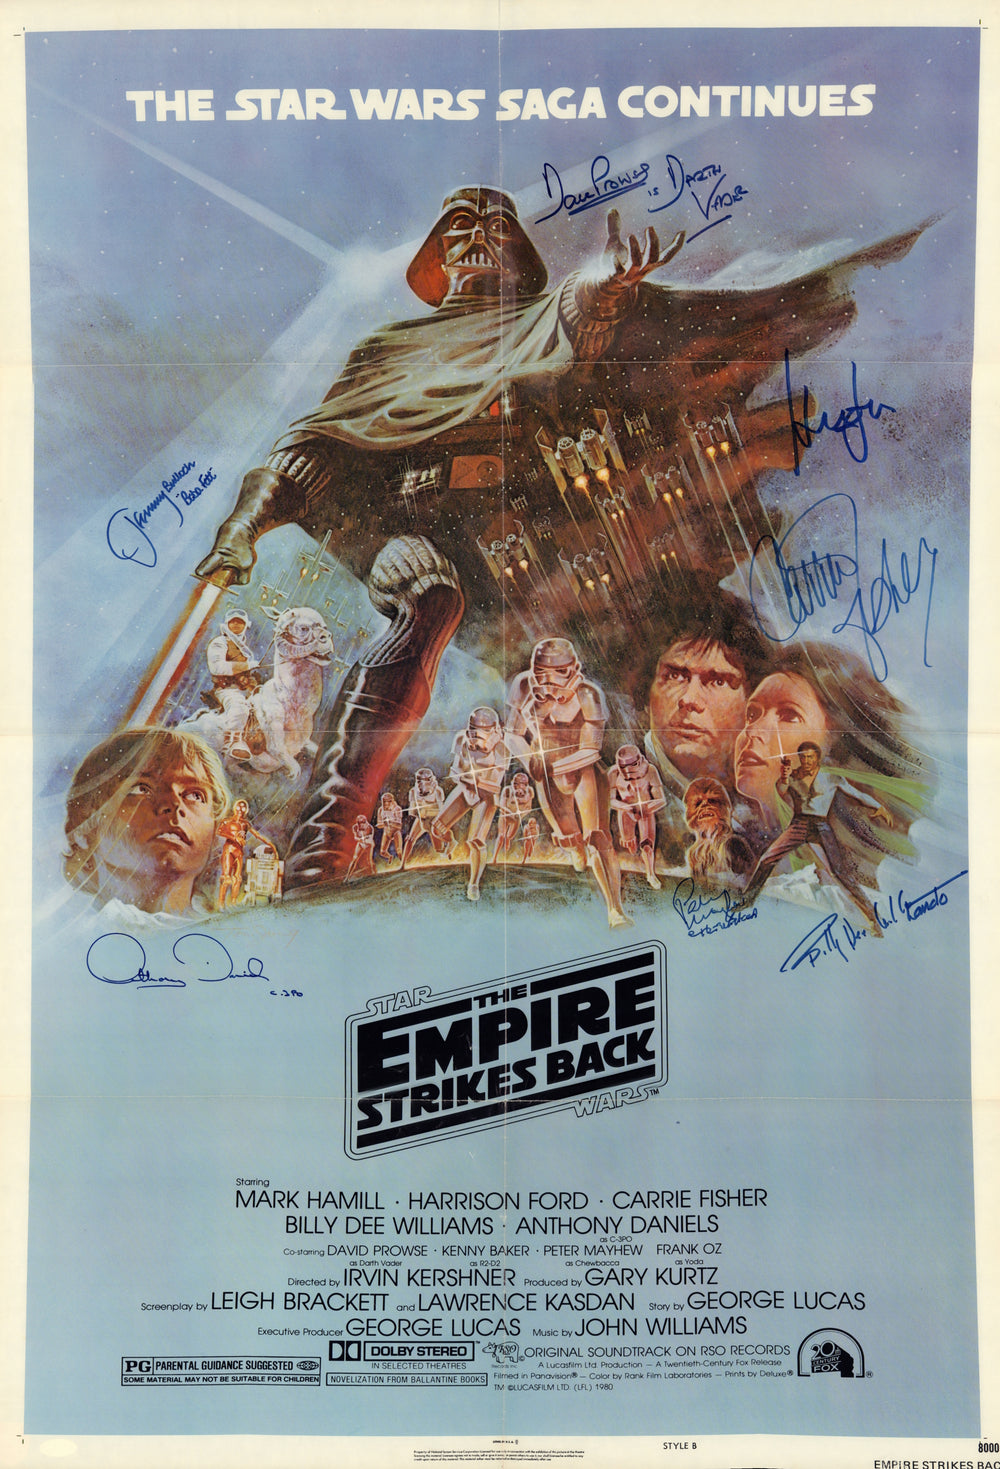 Star Wars: The Empire Strikes Back Poster Signed by Harrison Ford, Carrie Fisher, Peter Mayhew, Jeremy Bulloch, Anthony Daniels, Dave Prowse, & Billy Dee Williams